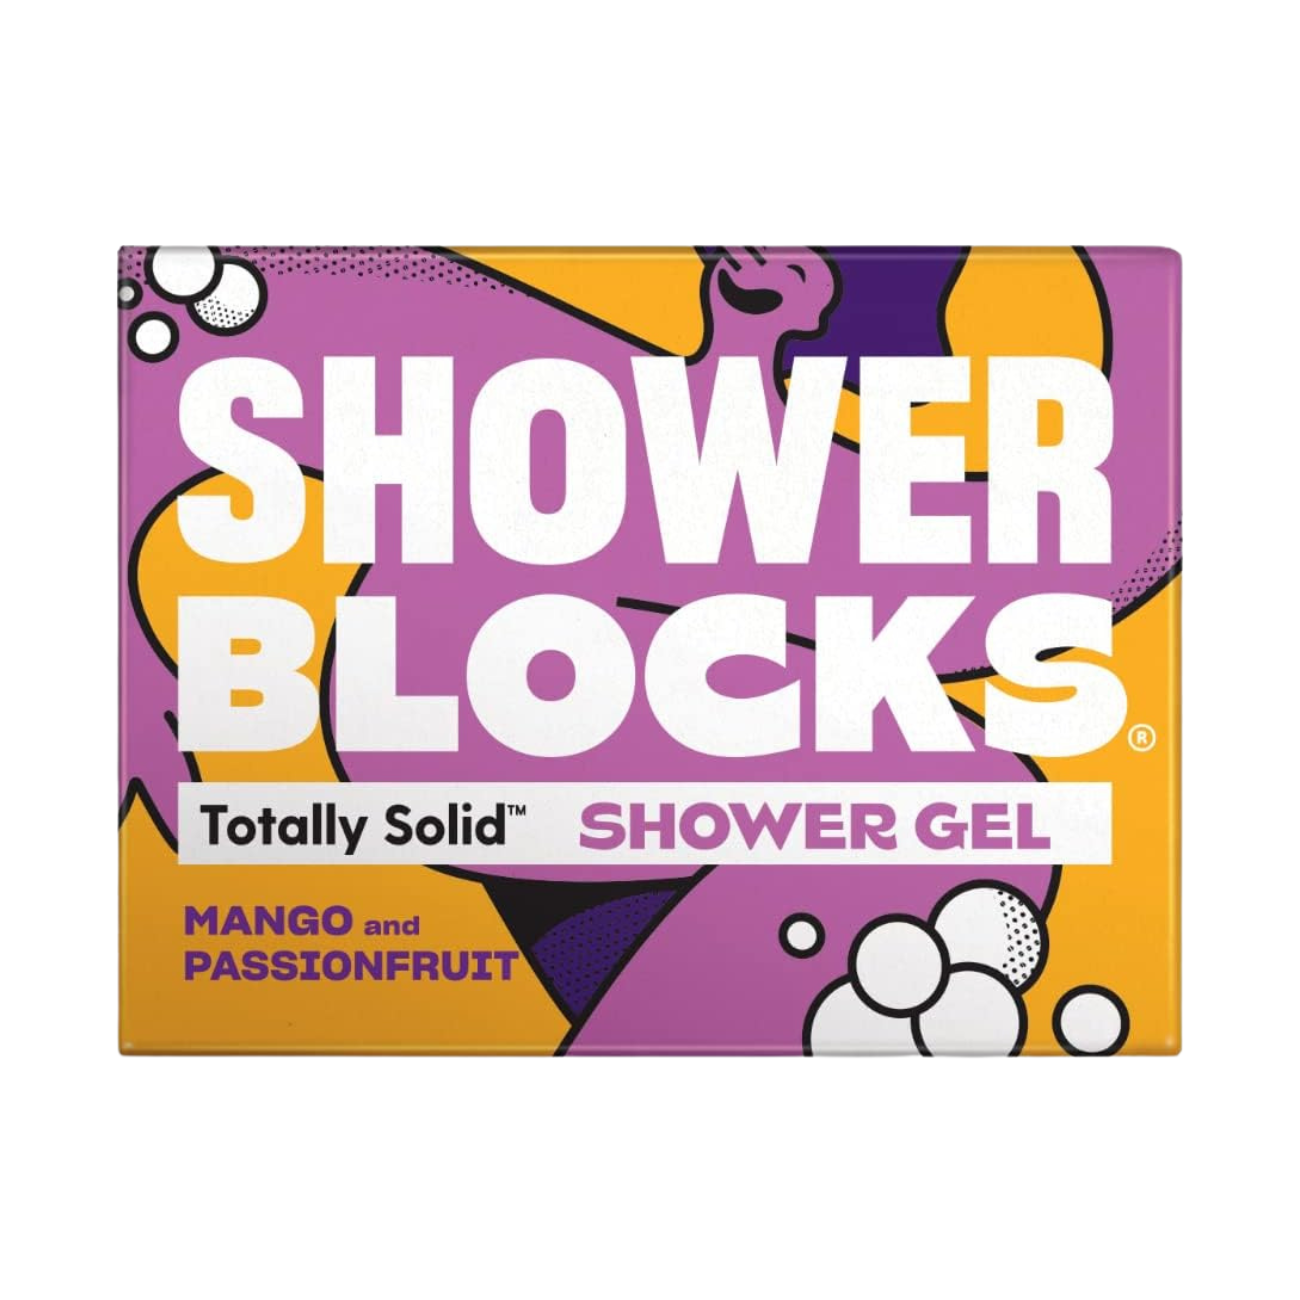 Totally Solid Shower Gel: Mango & Passionfruit 100g